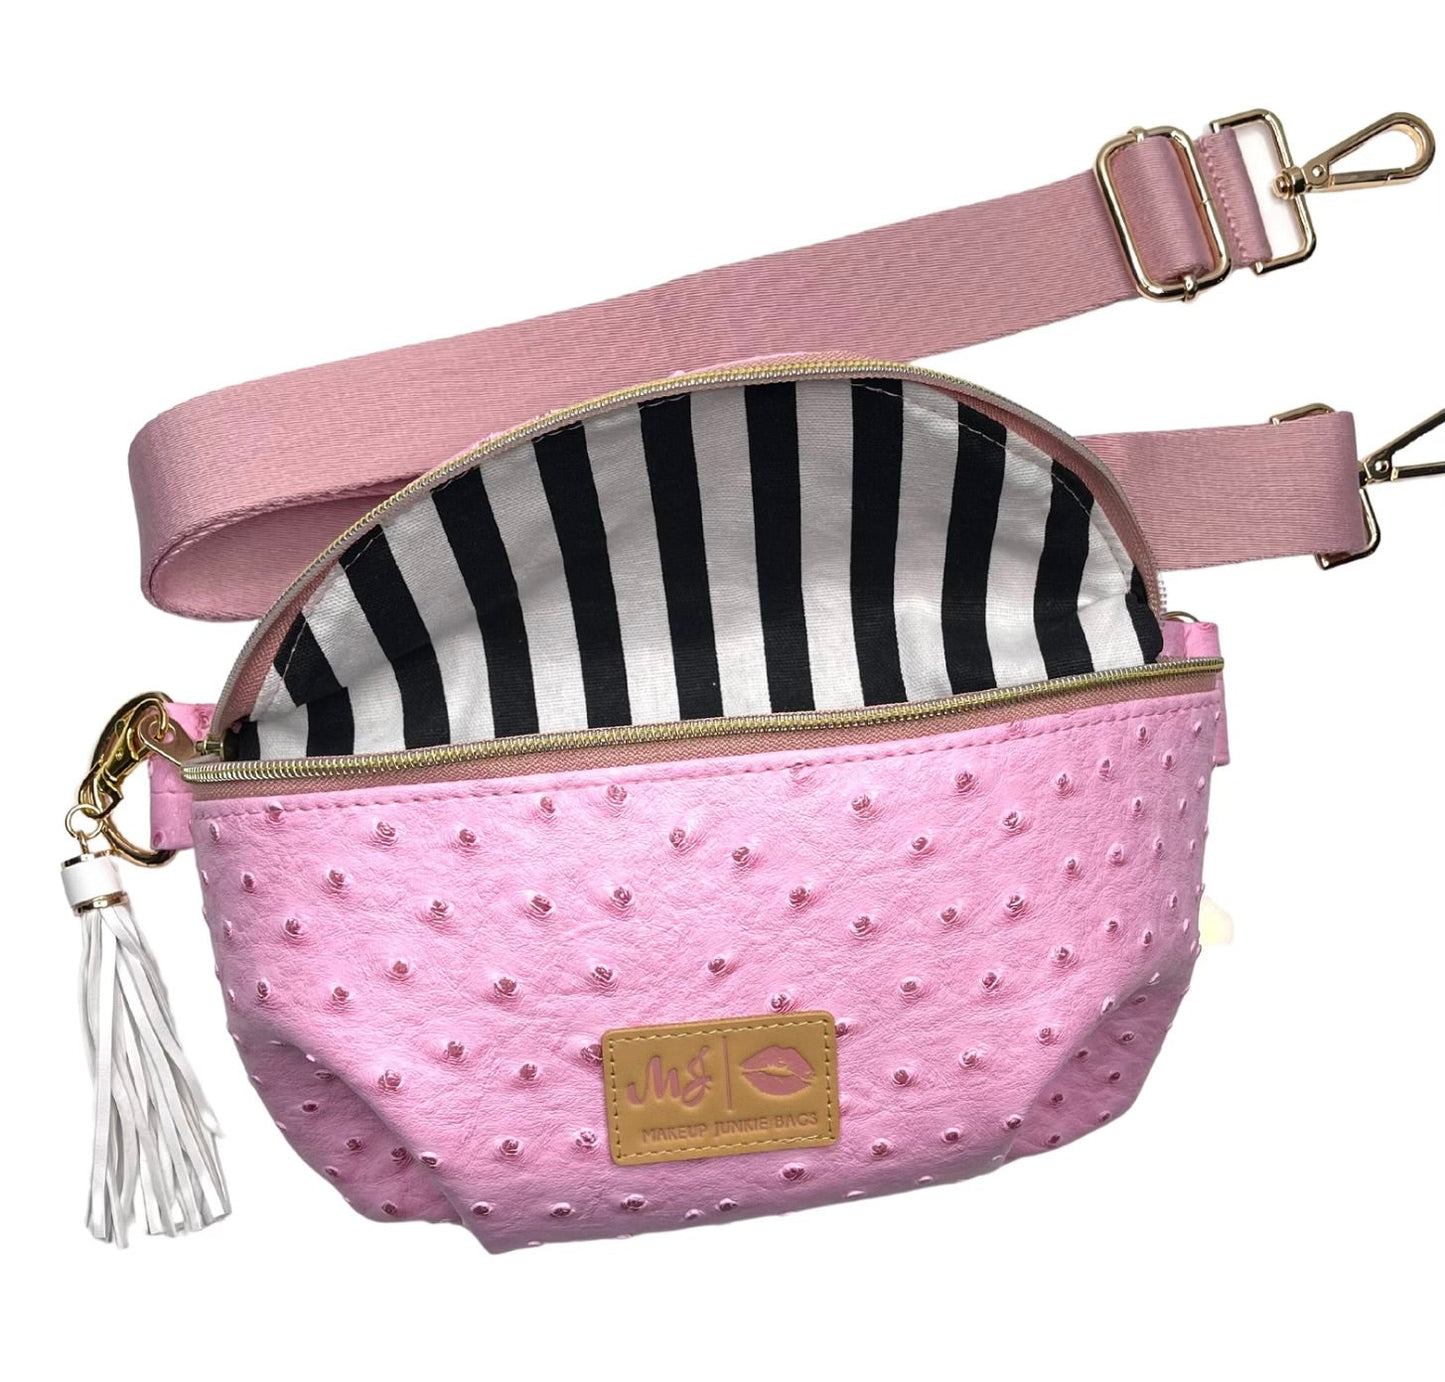 Sidekick Bag - Baby Blush Ostrich (Comes with a basic blush strap. Please check out our selection of additional decorative straps for purchase.)